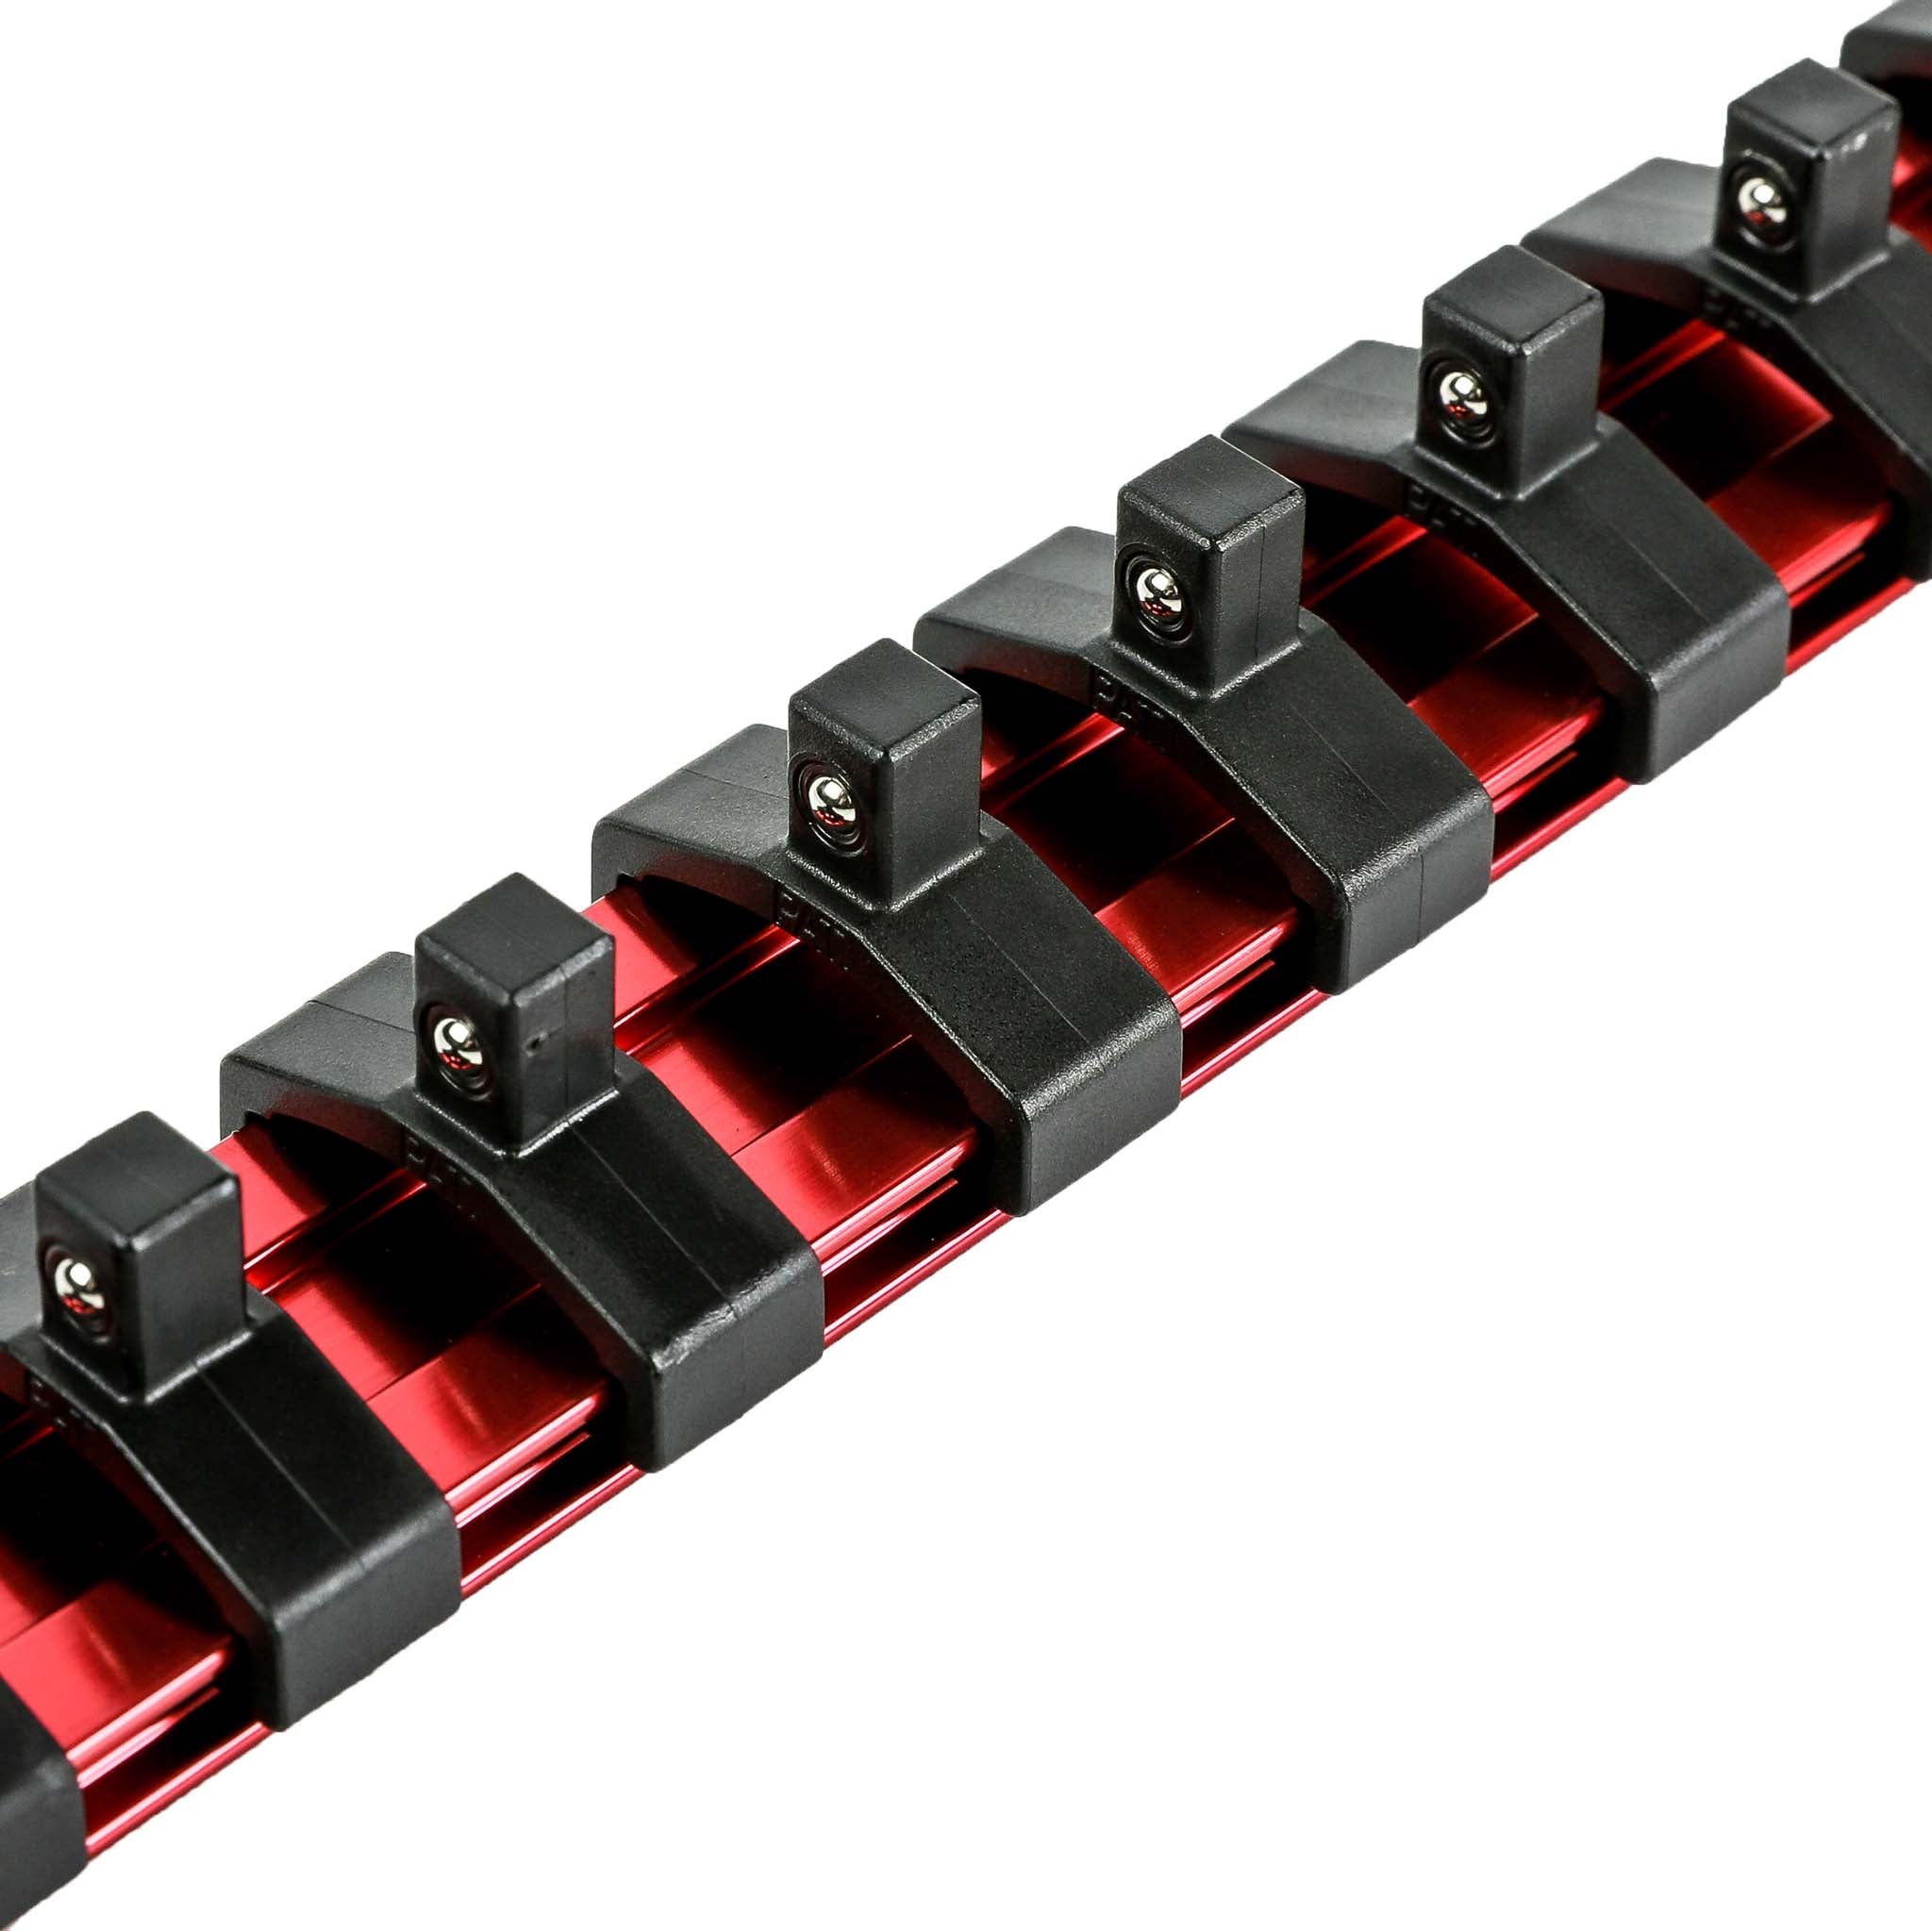 RTG Highlights our ARES 70752 and 70753 Extension Holders 